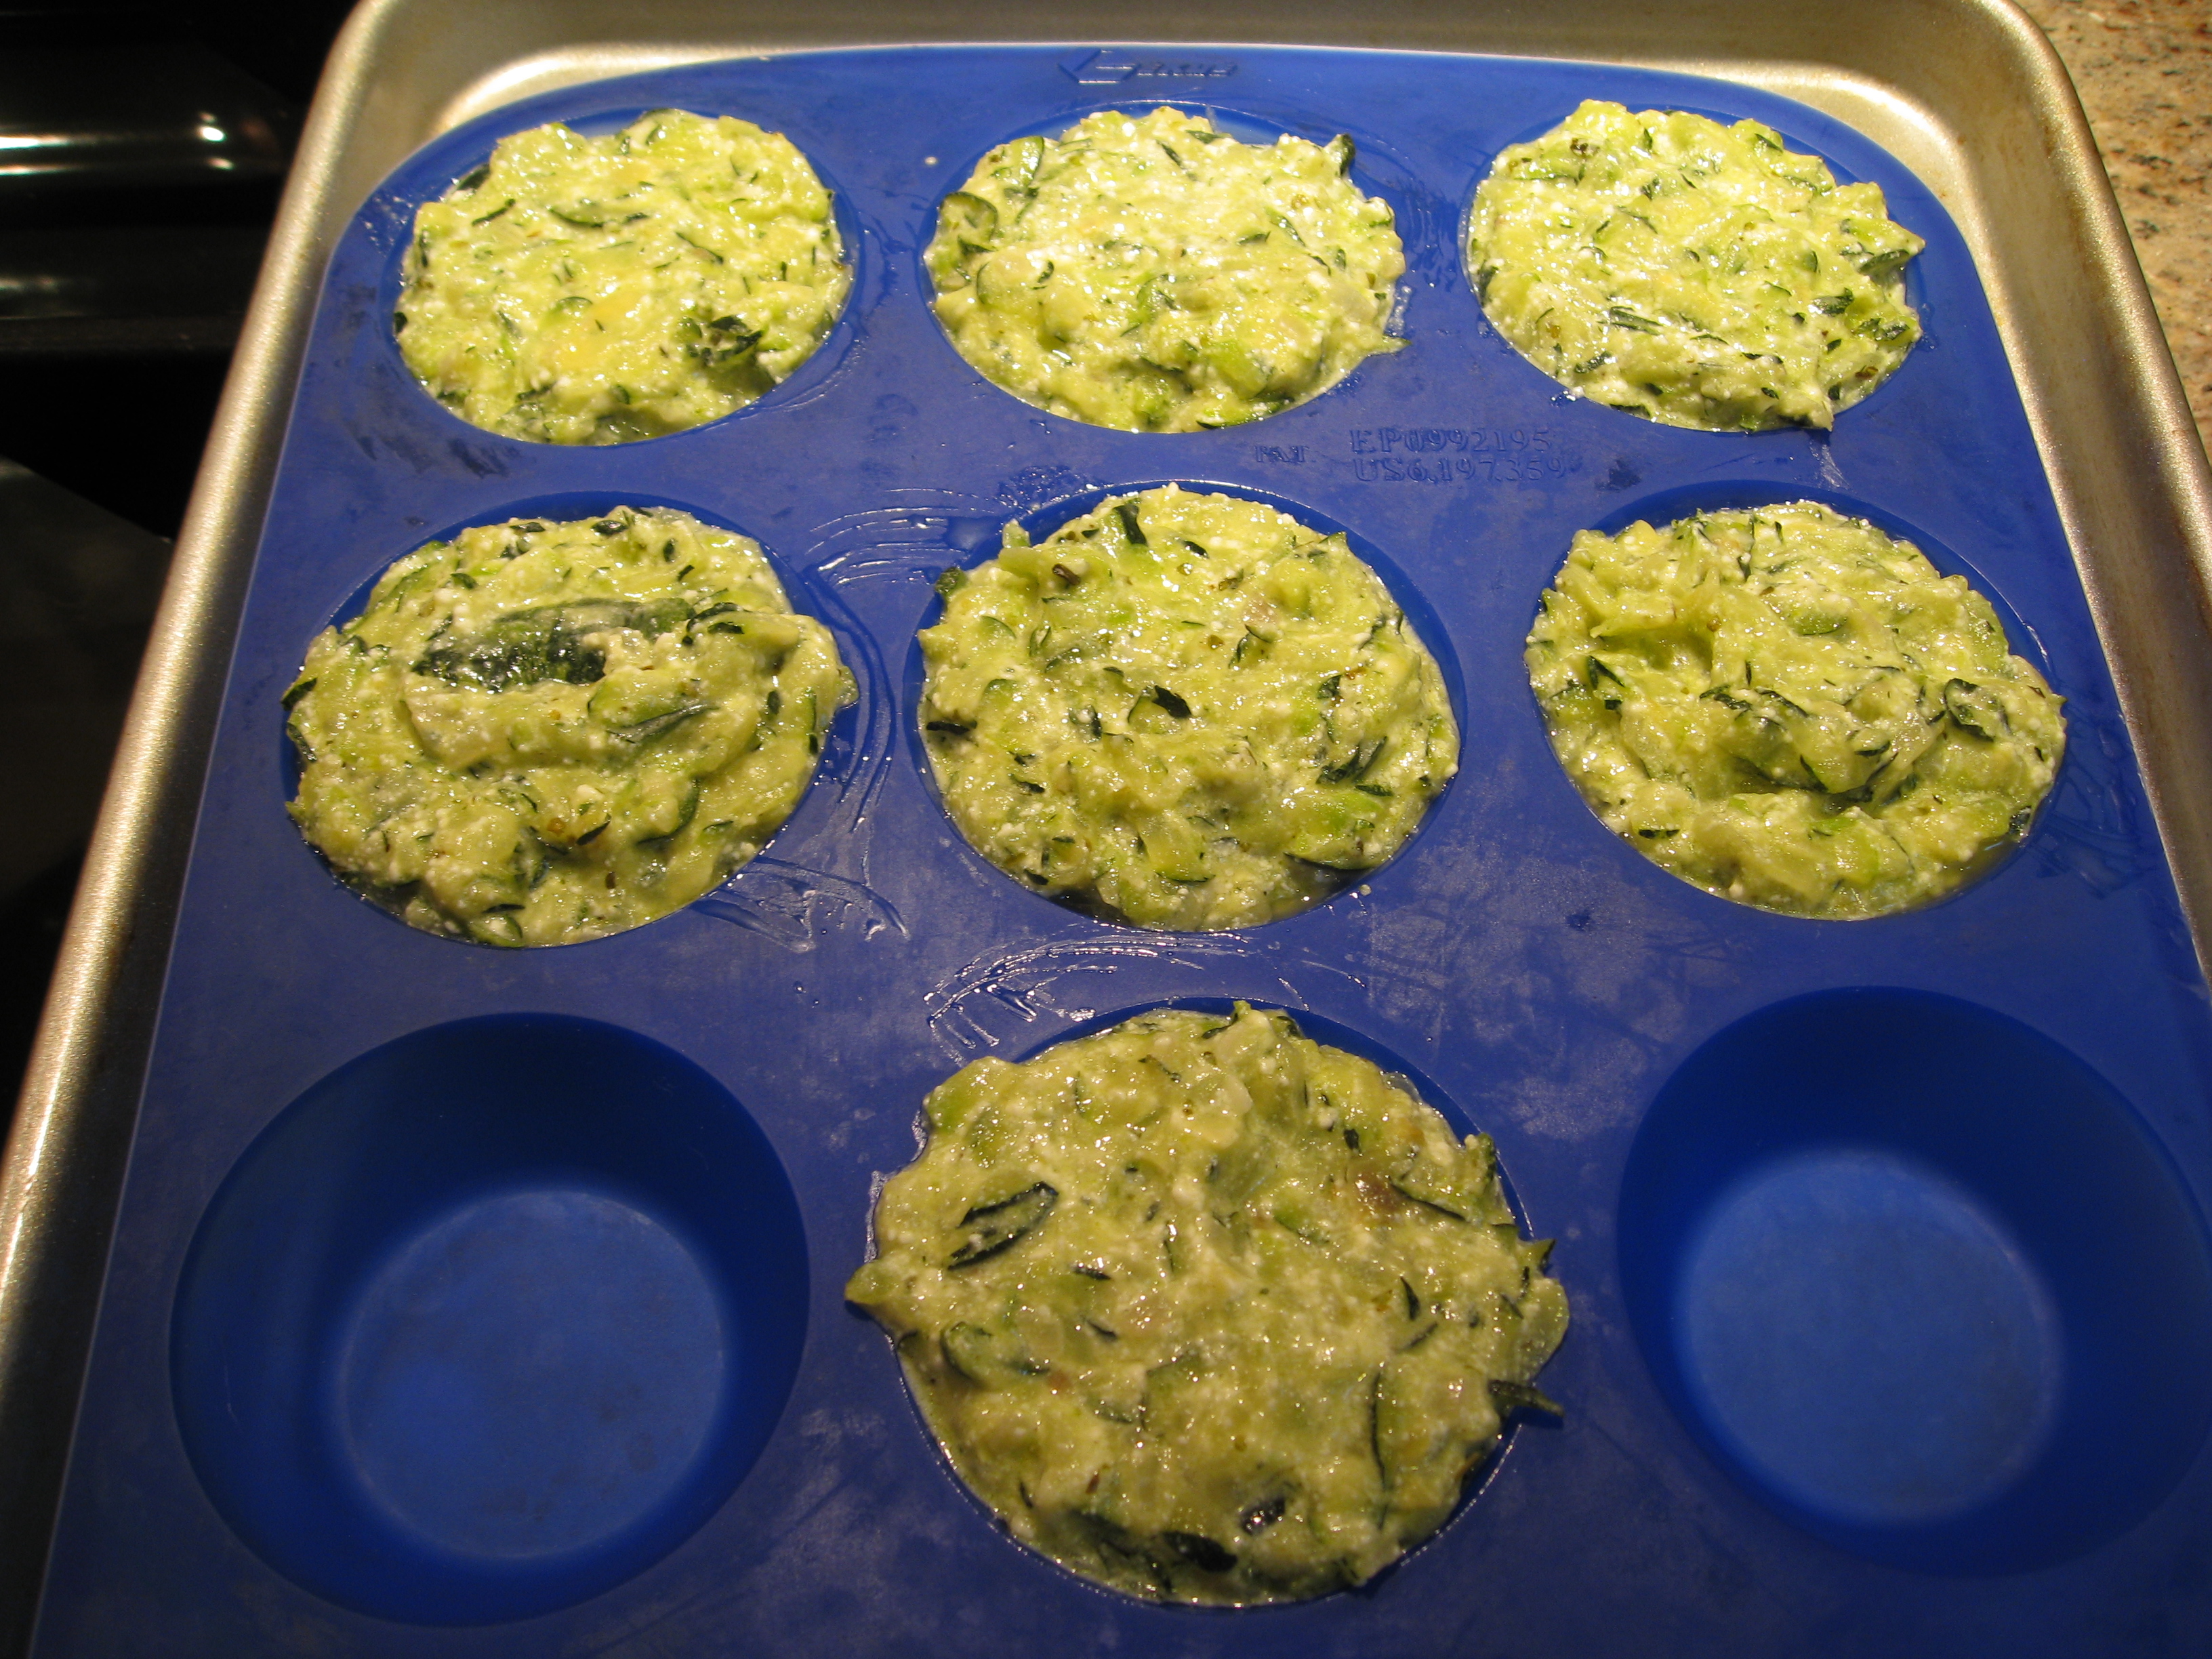 zucchini mixture ready to go in the oven.